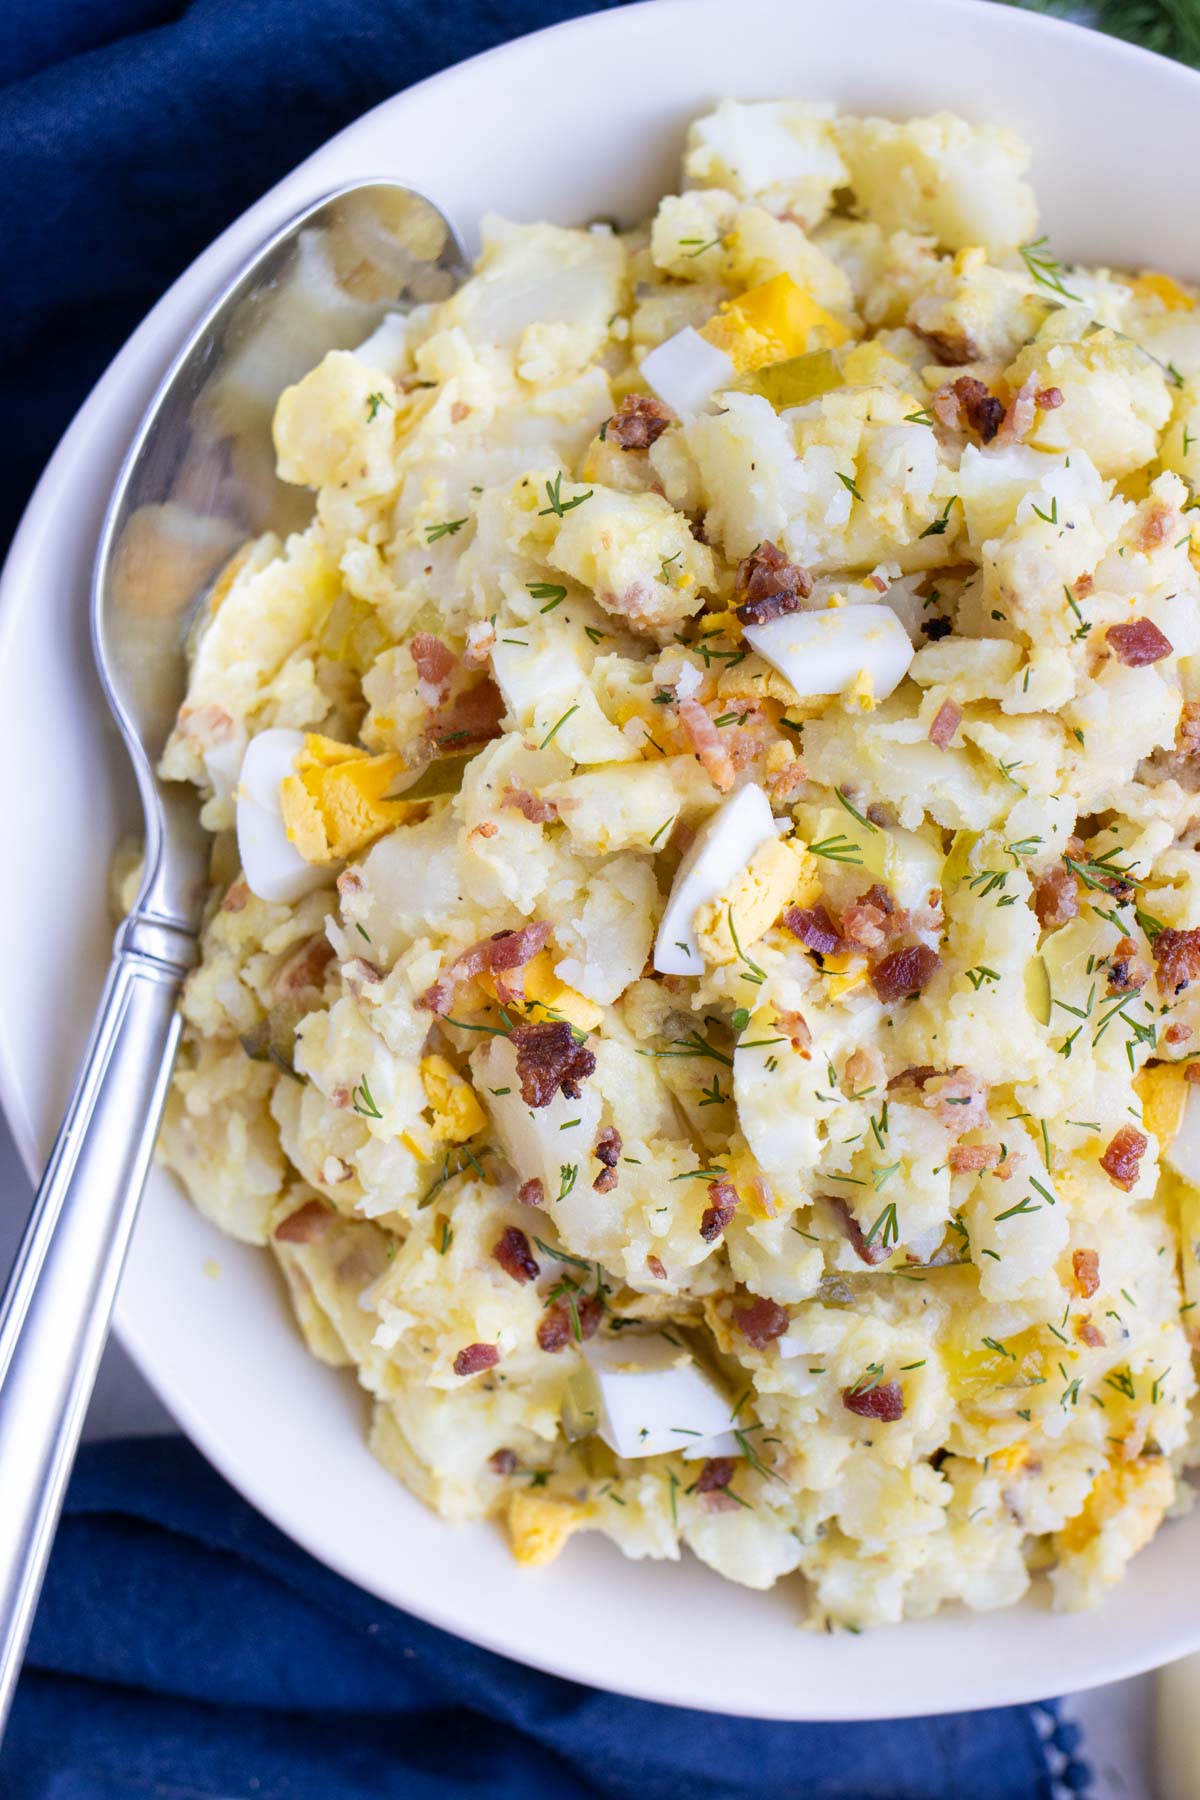 Instant Pot Potato Salad RECIPE served in a white bowl with a silver serving spoon.